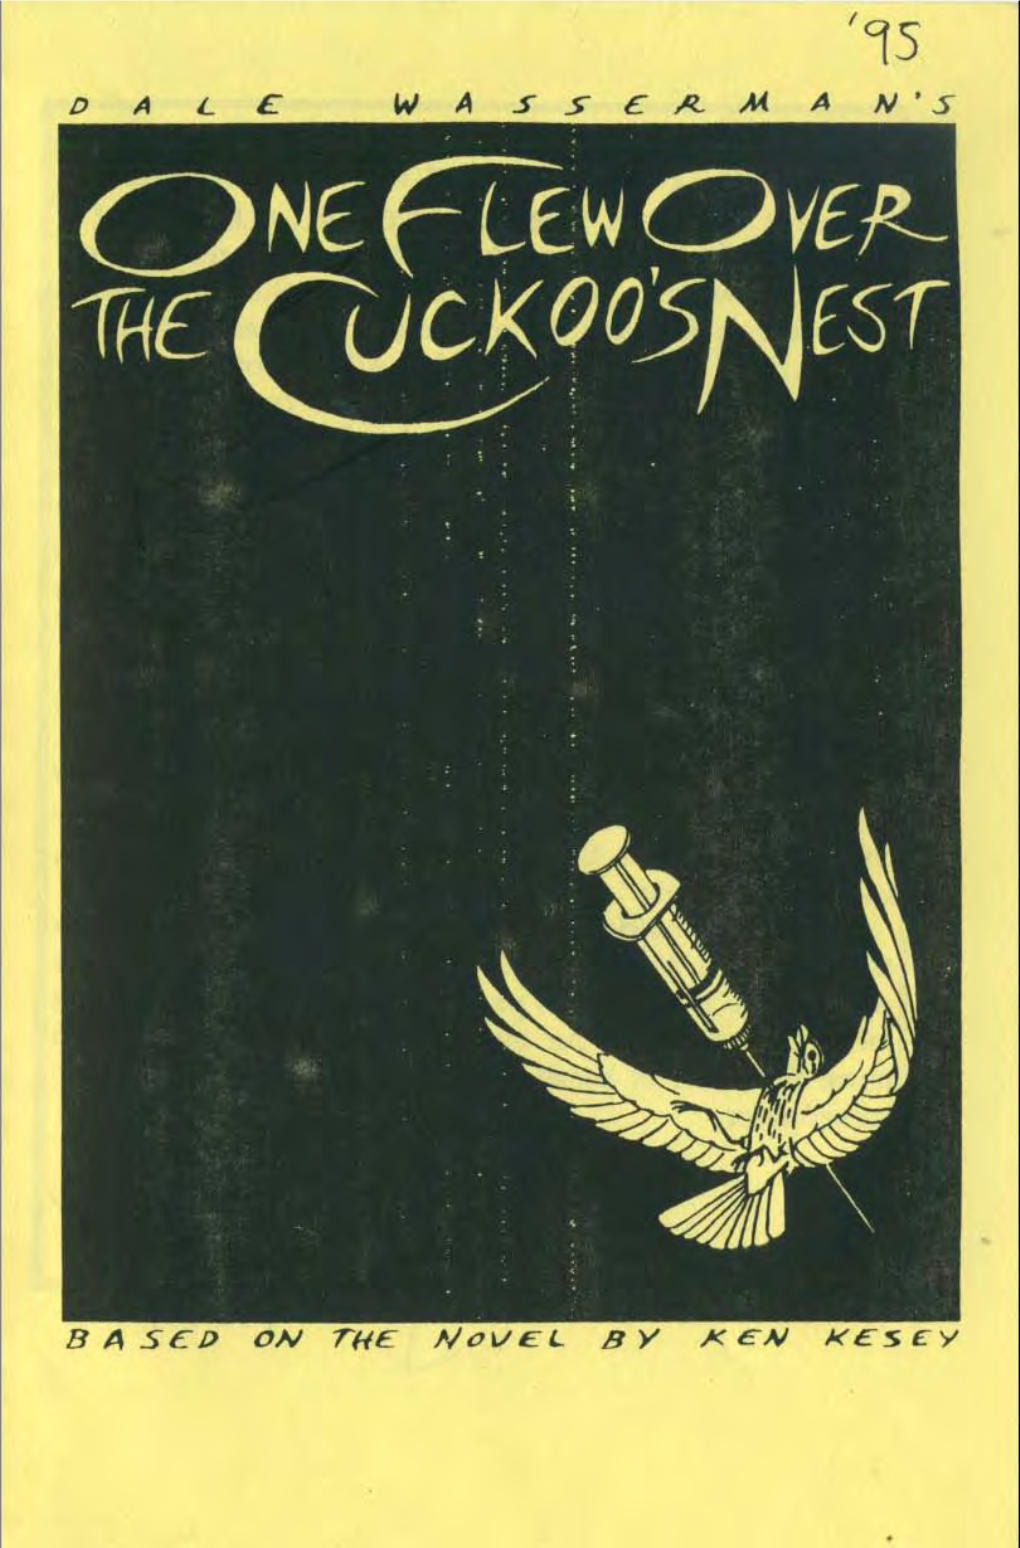 See the Program of One Flew Over the Cuckoo's Nest